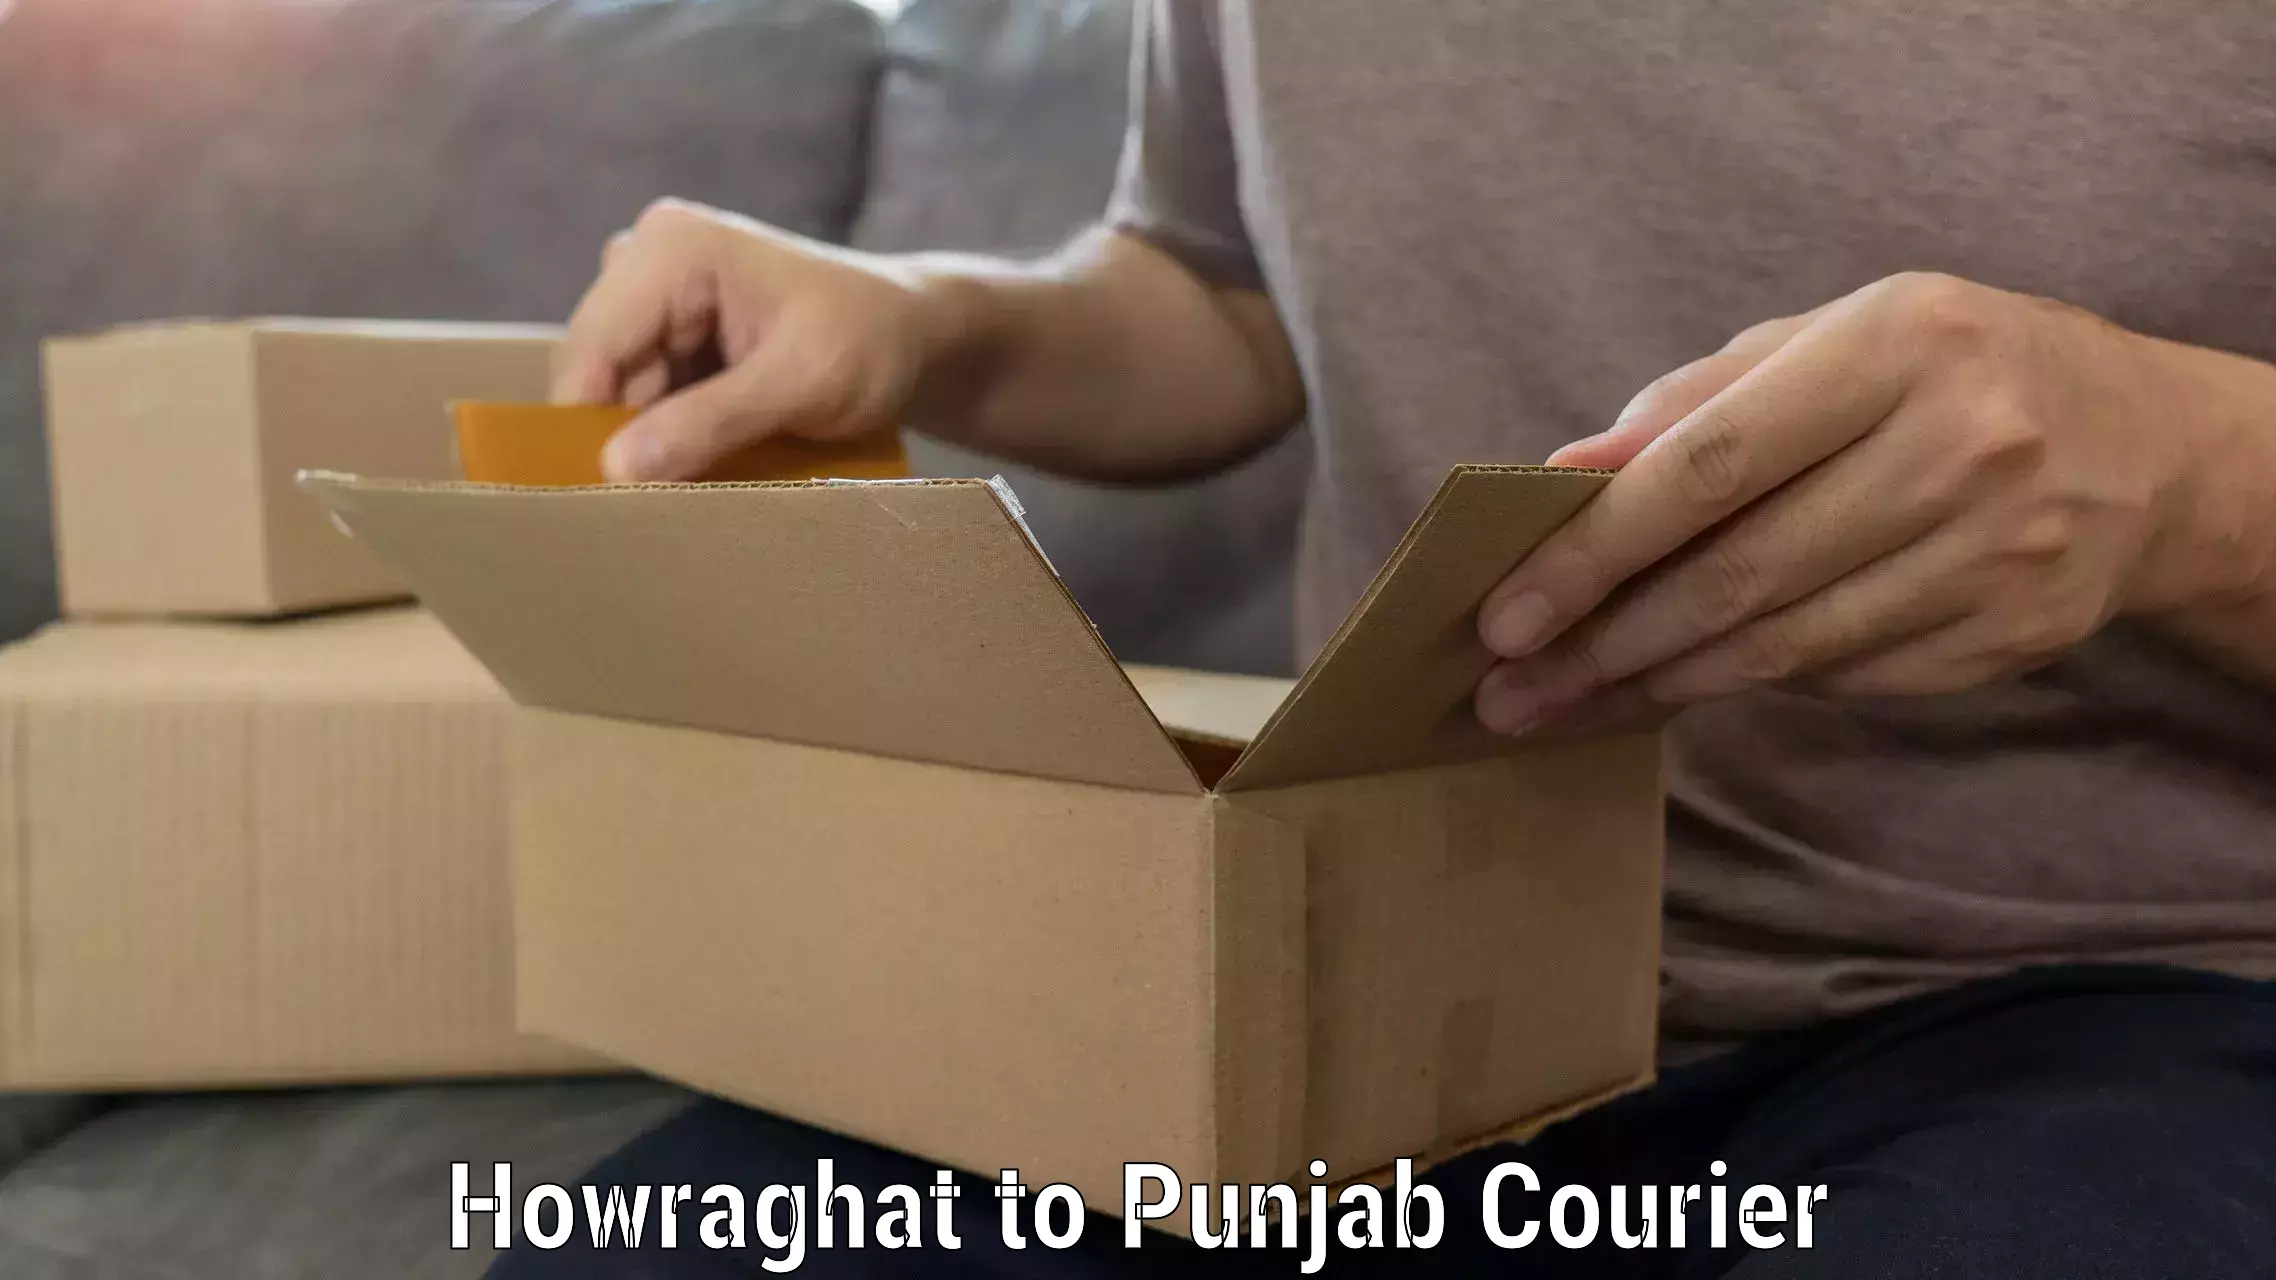 Efficient relocation services Howraghat to Ropar